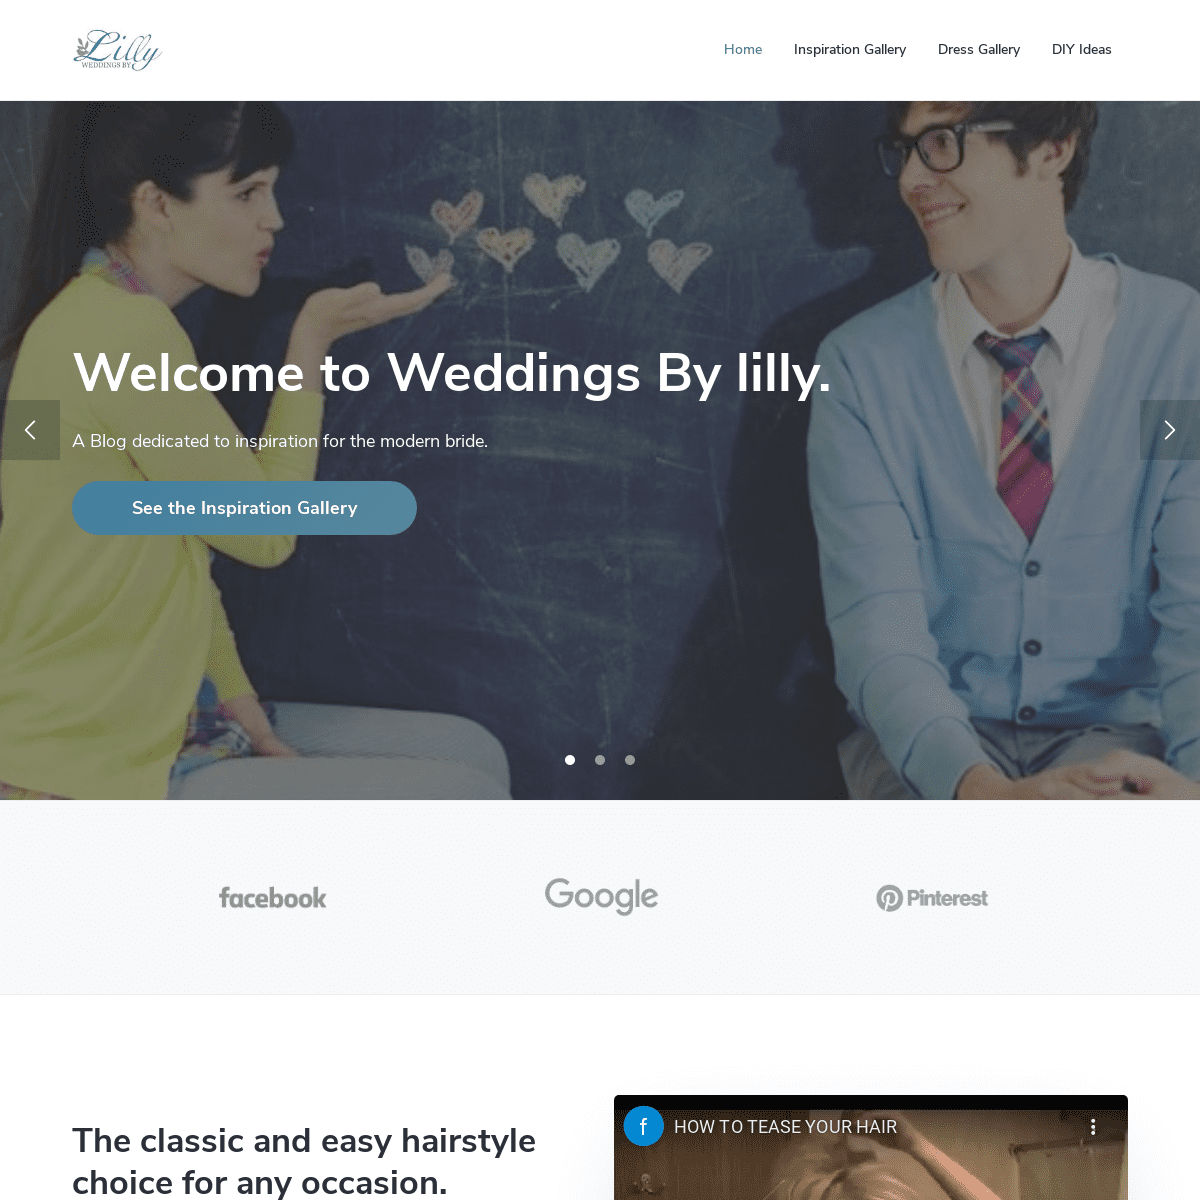 A complete backup of weddingsbylilly.com